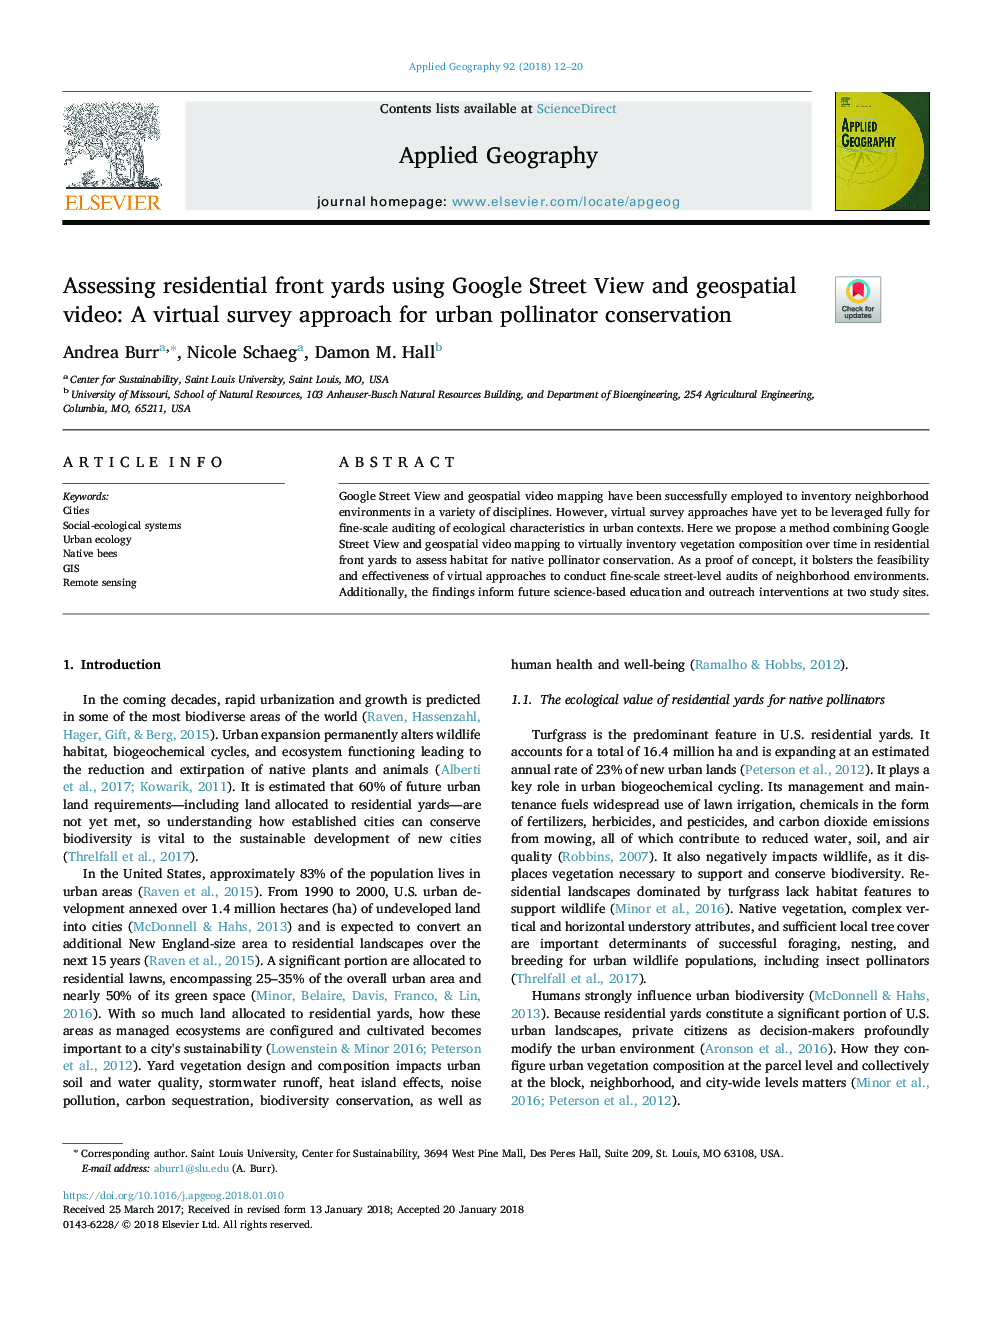 Assessing residential front yards using Google Street View and geospatial video: A virtual survey approach for urban pollinator conservation